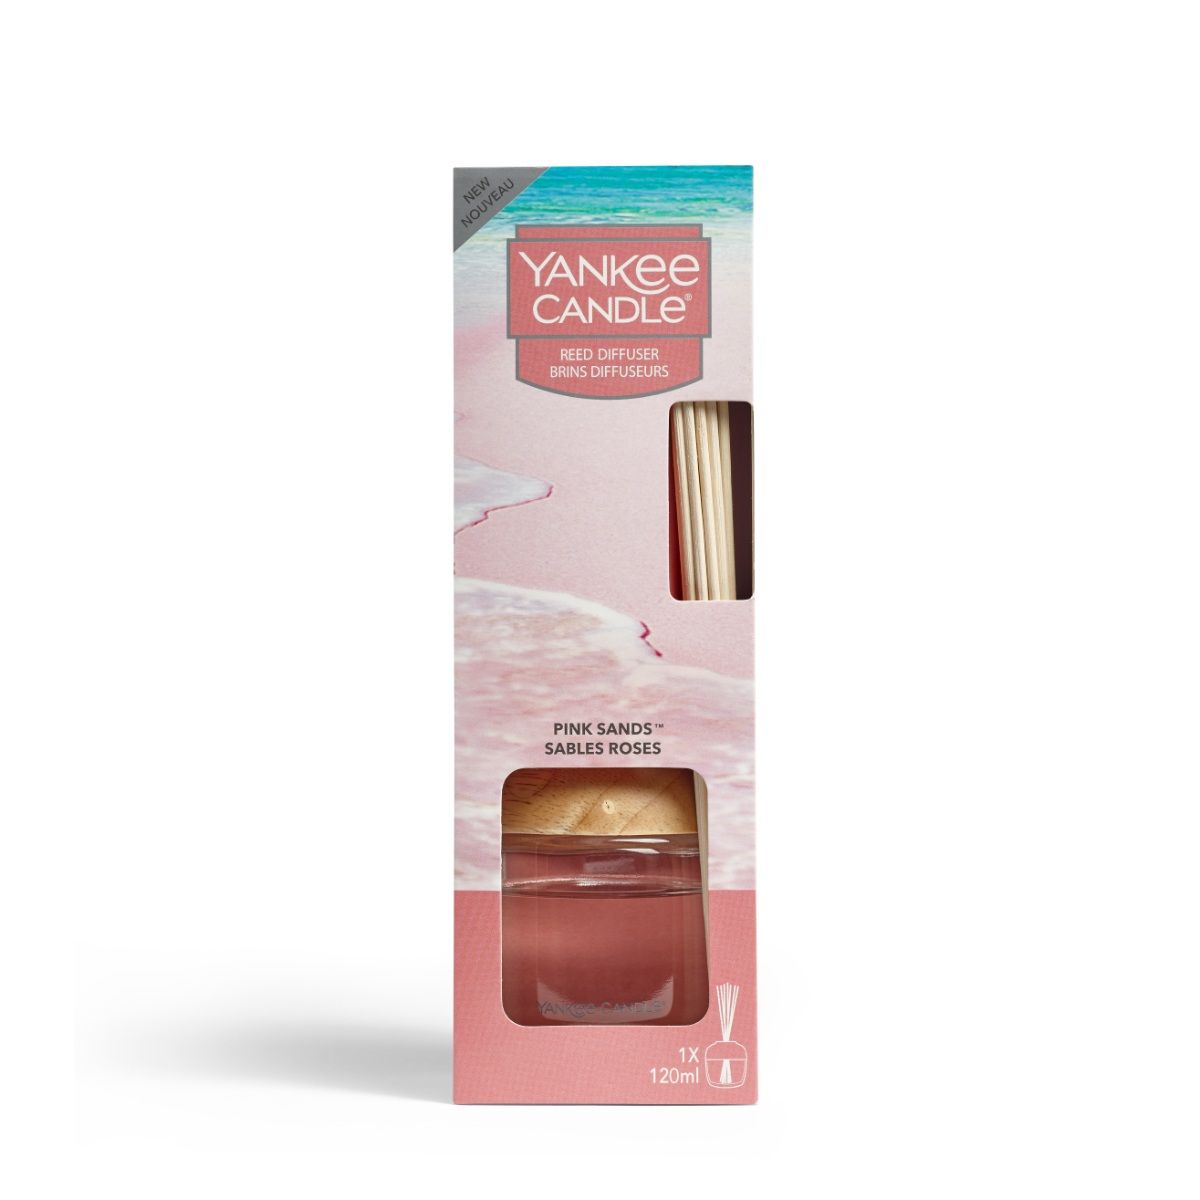 Buy Yankee Candle Original Reed Diffuser - Pink Sands Online